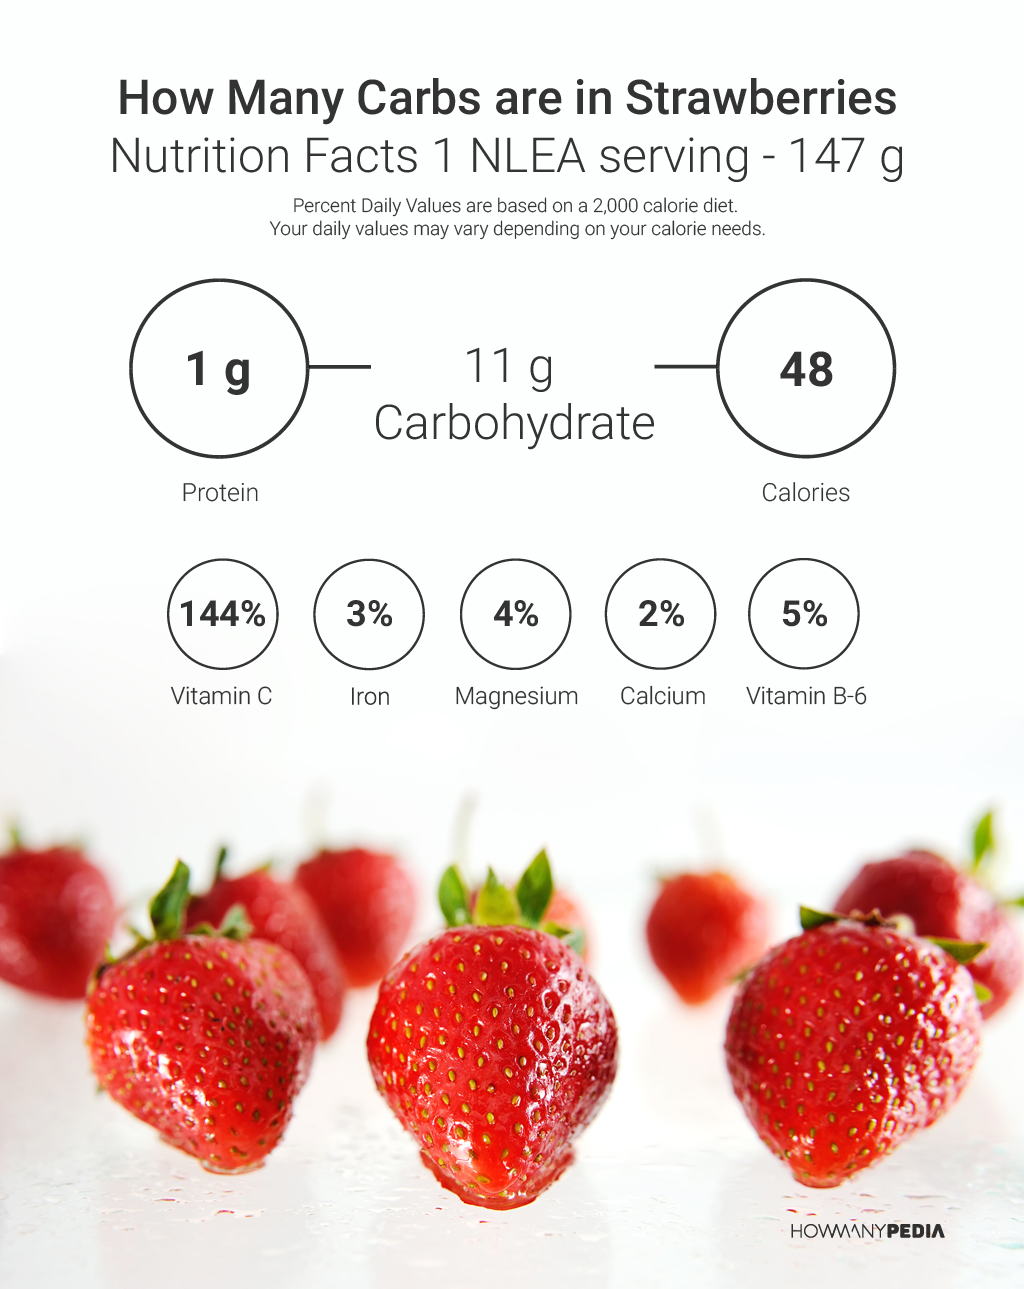 How Many Carbs are in Strawberries Nutrition Facts